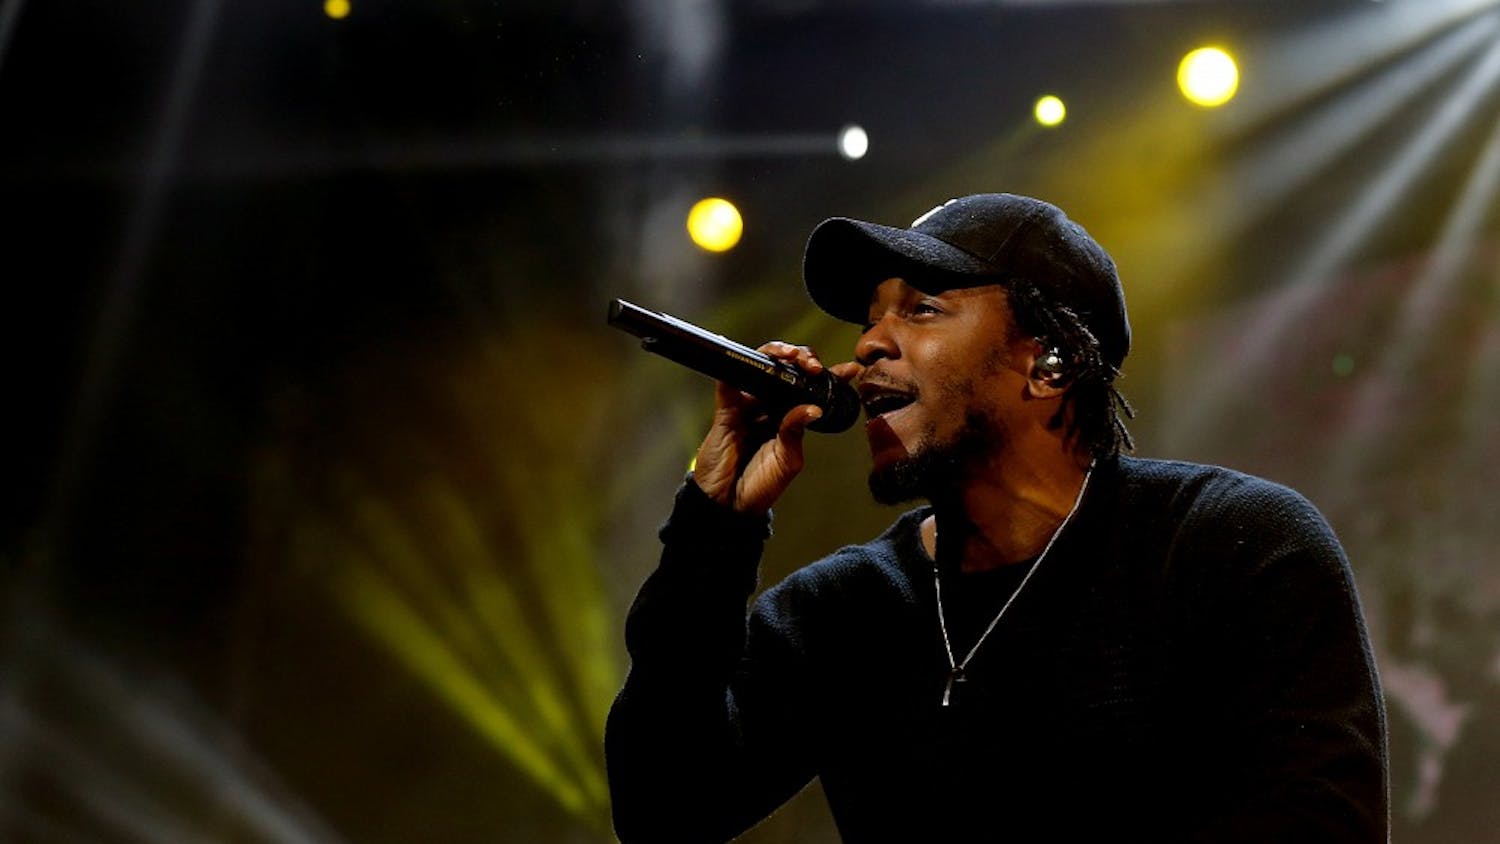 Kendrick Lamar performs during the BET Experience at Staples Center on June 27, 2015 in Los Angeles. (Luis Sinco/Los Angeles Times/TNS)